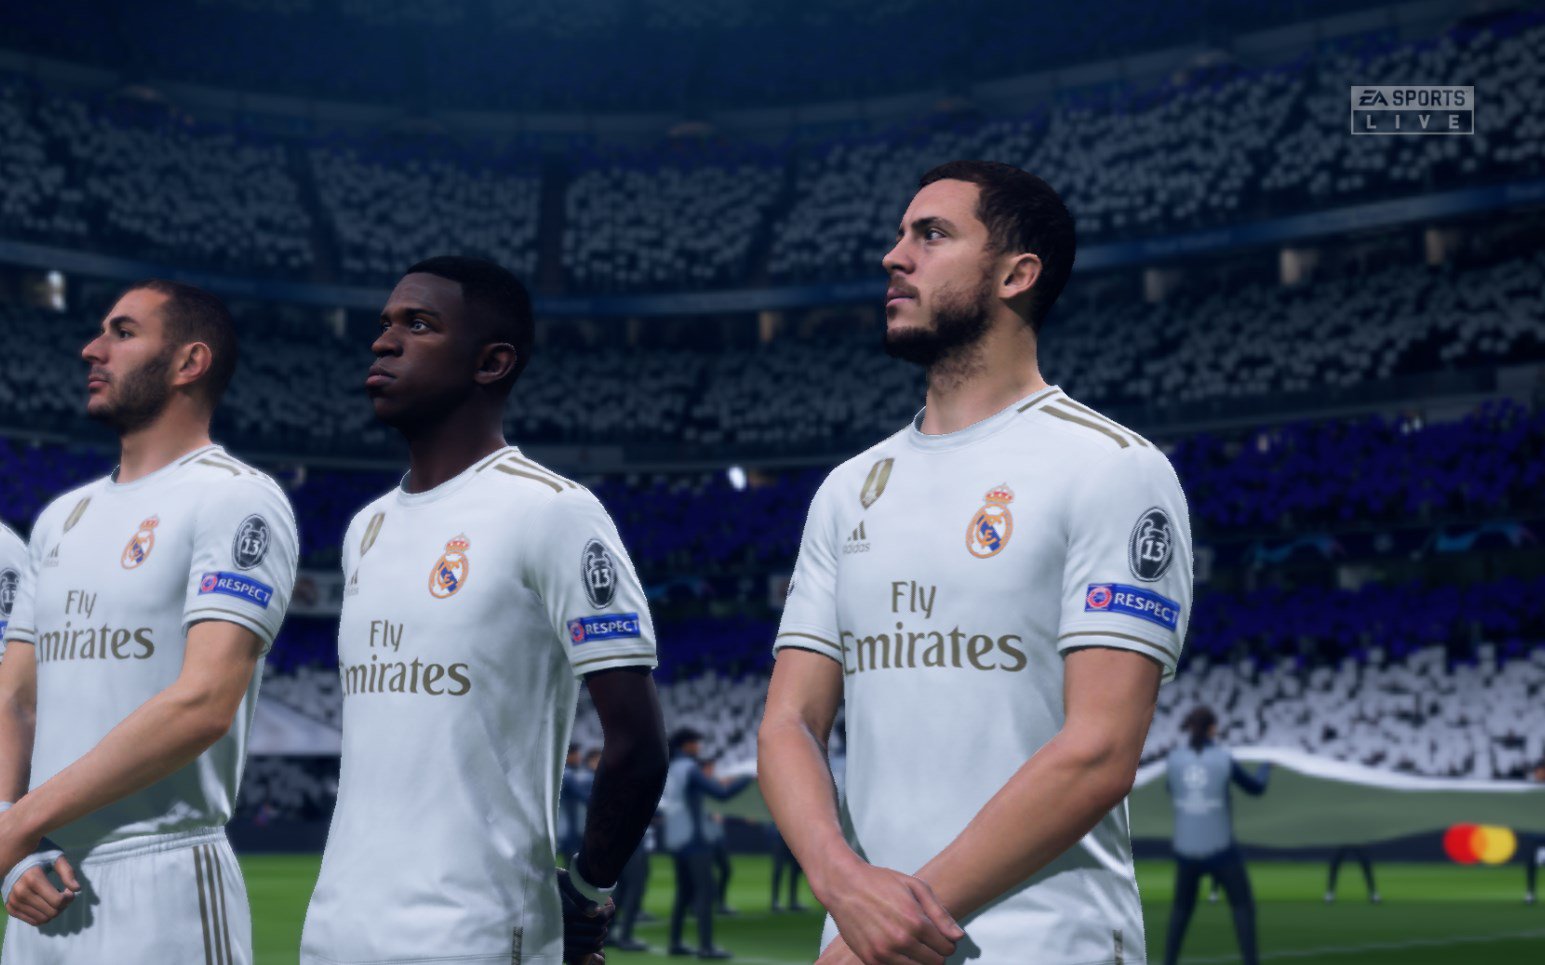 download fifa 20 setup for pc